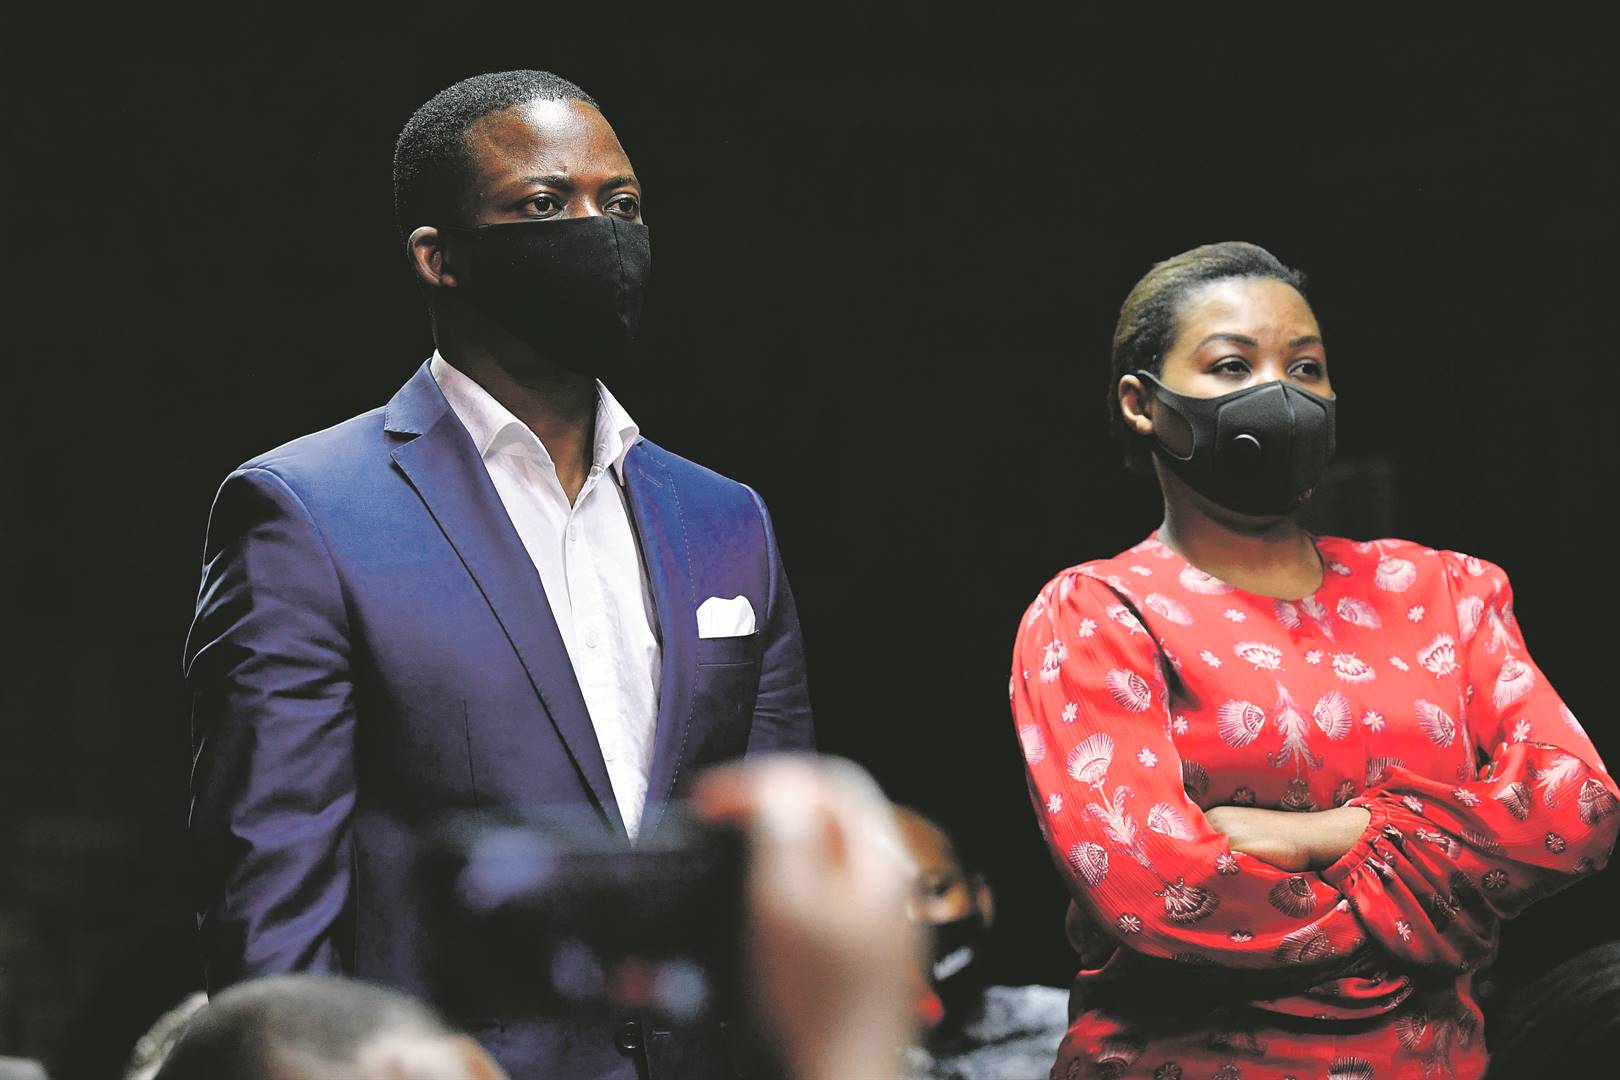 Shepherd Bushiri has skipped the country, despite bail conditions expressly prohibiting any form of international travel.